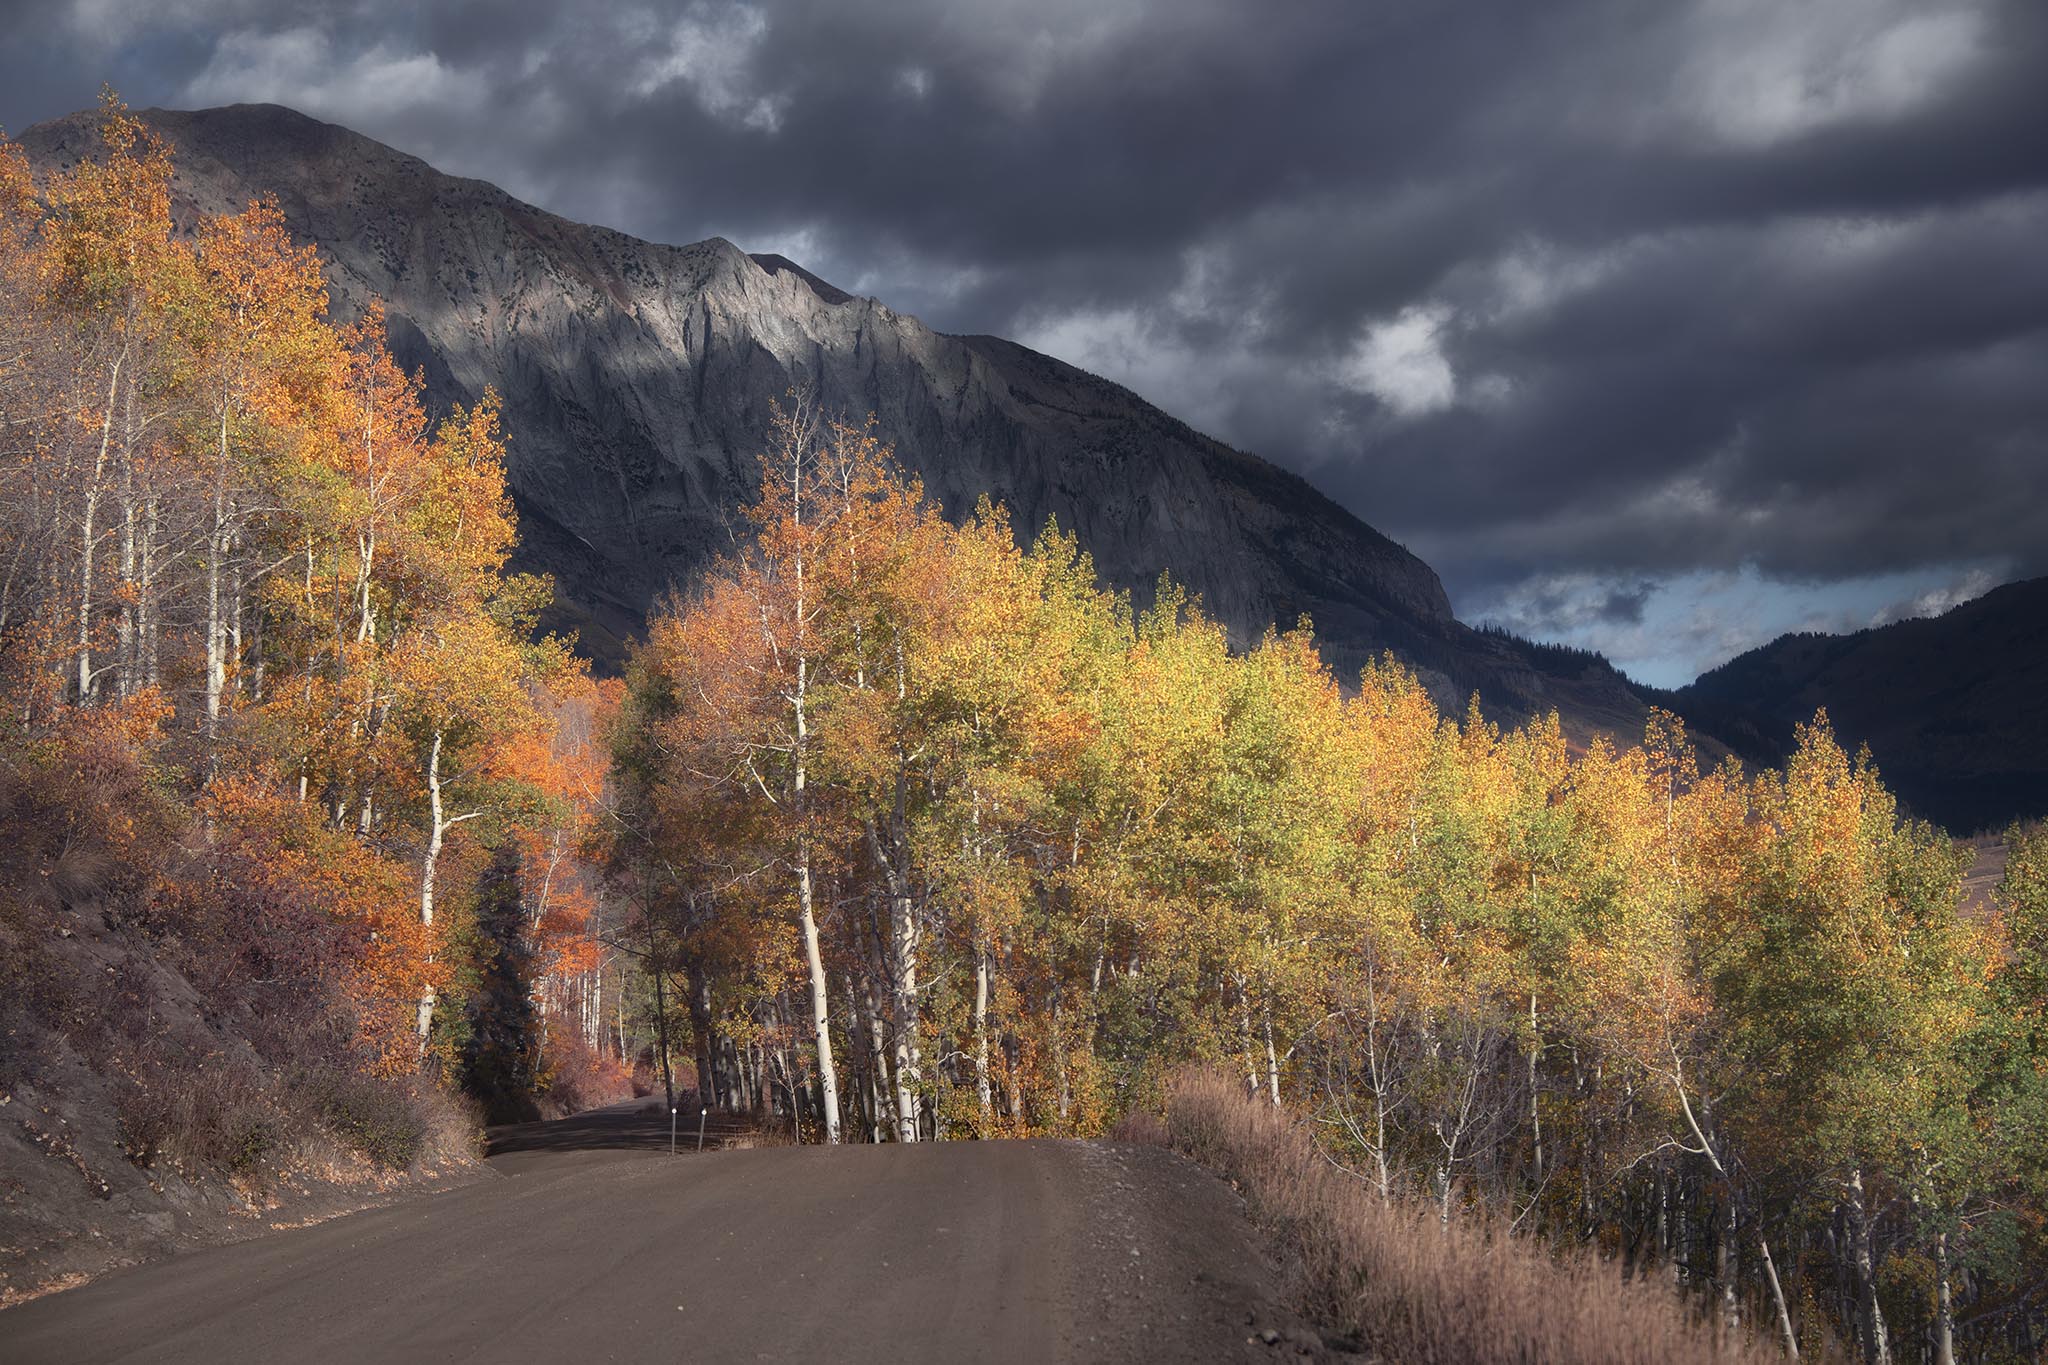 Aspen Trees at Crested Butte